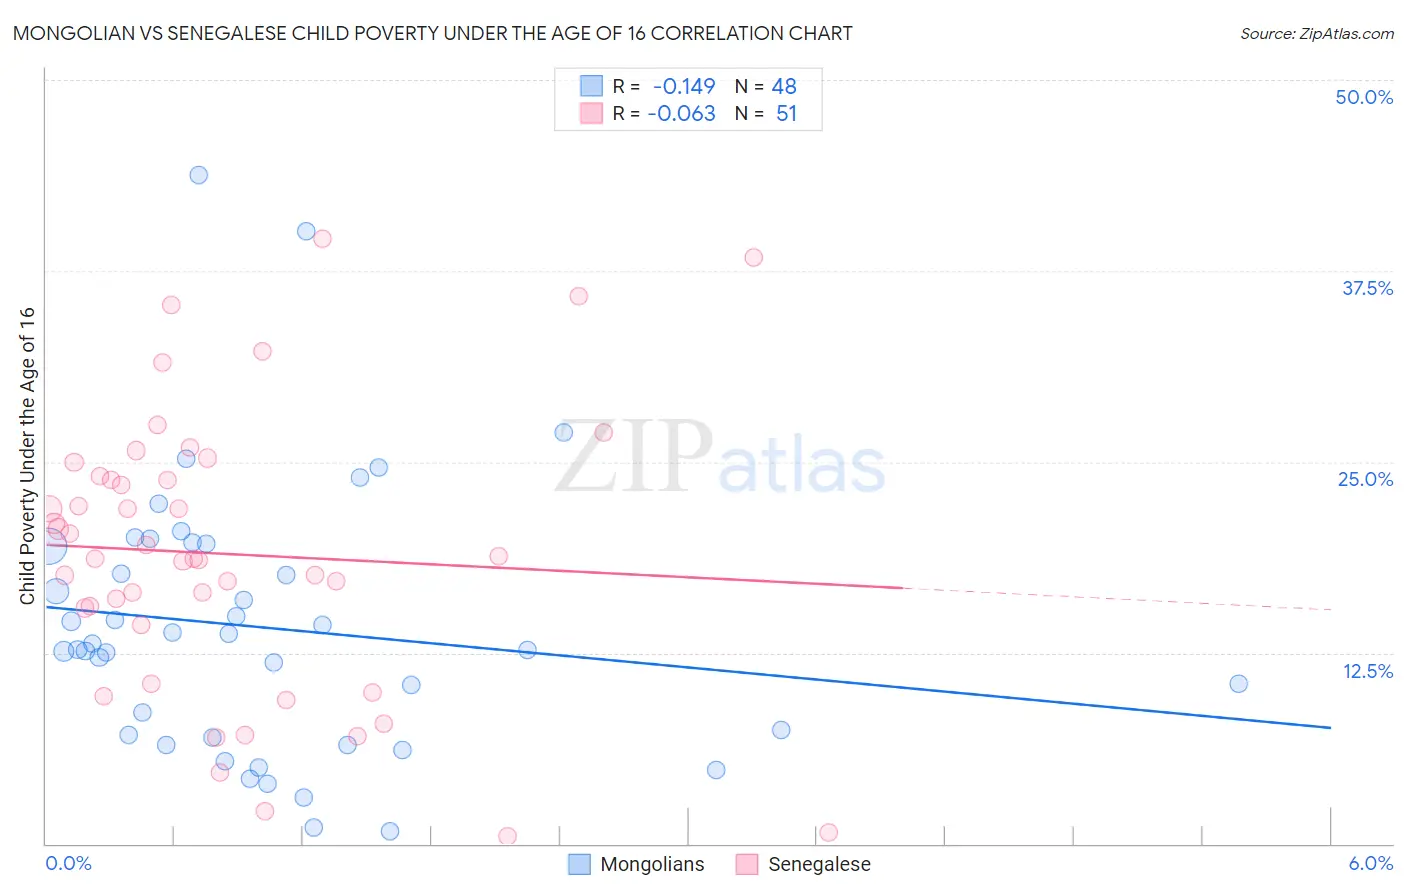 Mongolian vs Senegalese Child Poverty Under the Age of 16